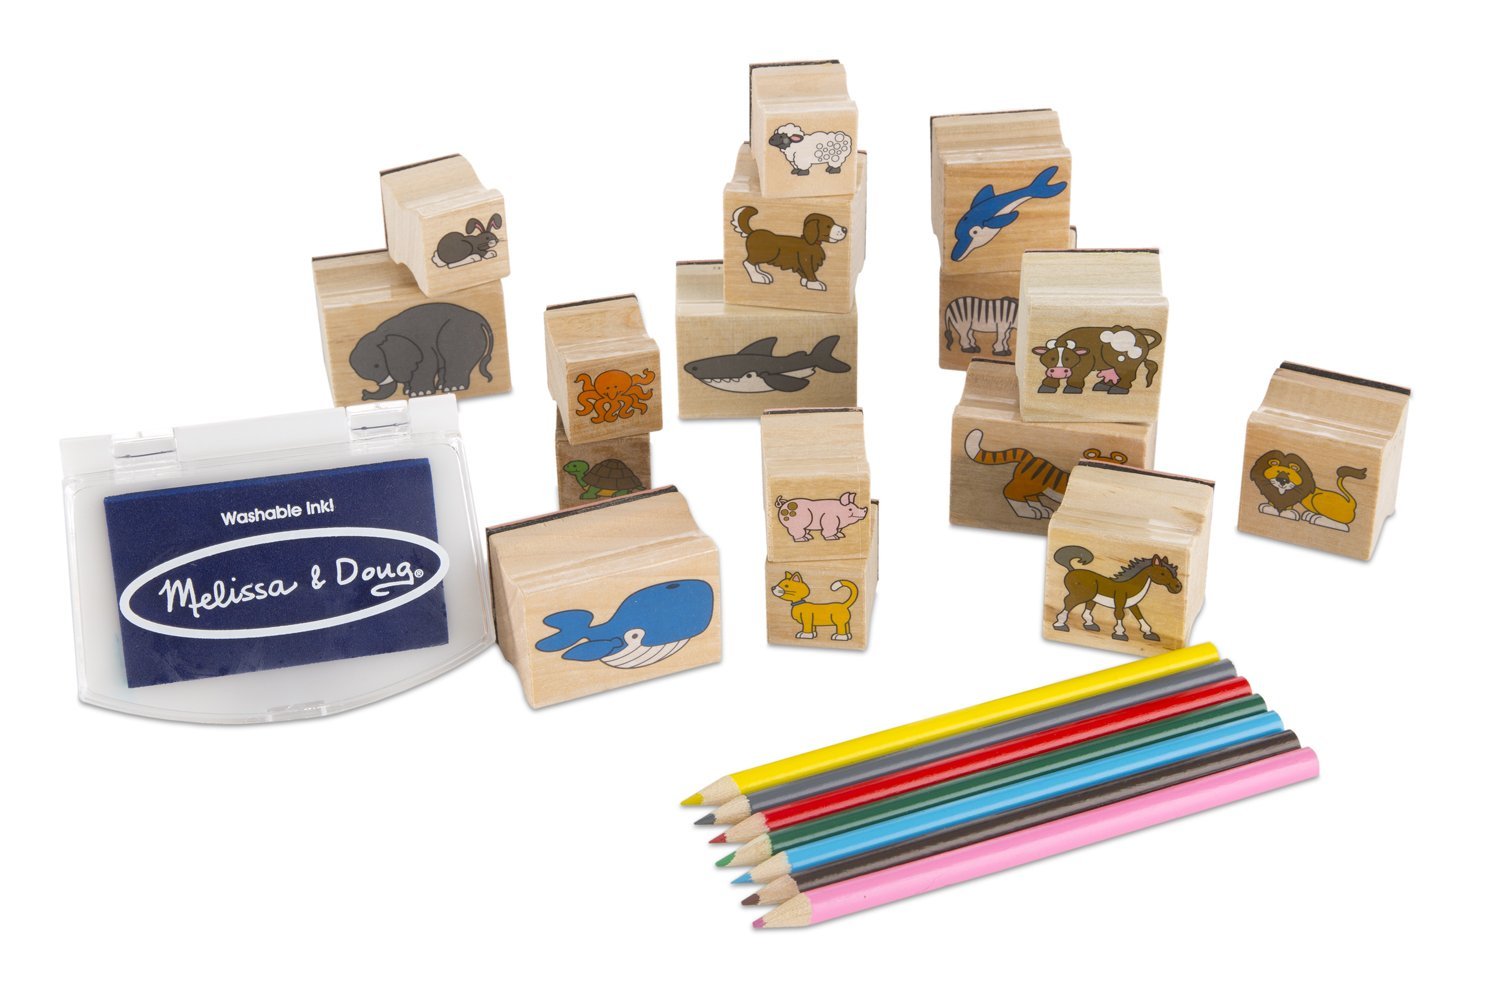 Melissa and Doug Wooden Animal Stamp Set 25 pieces Ages 4+000772037983 –  Olde Church Emporium